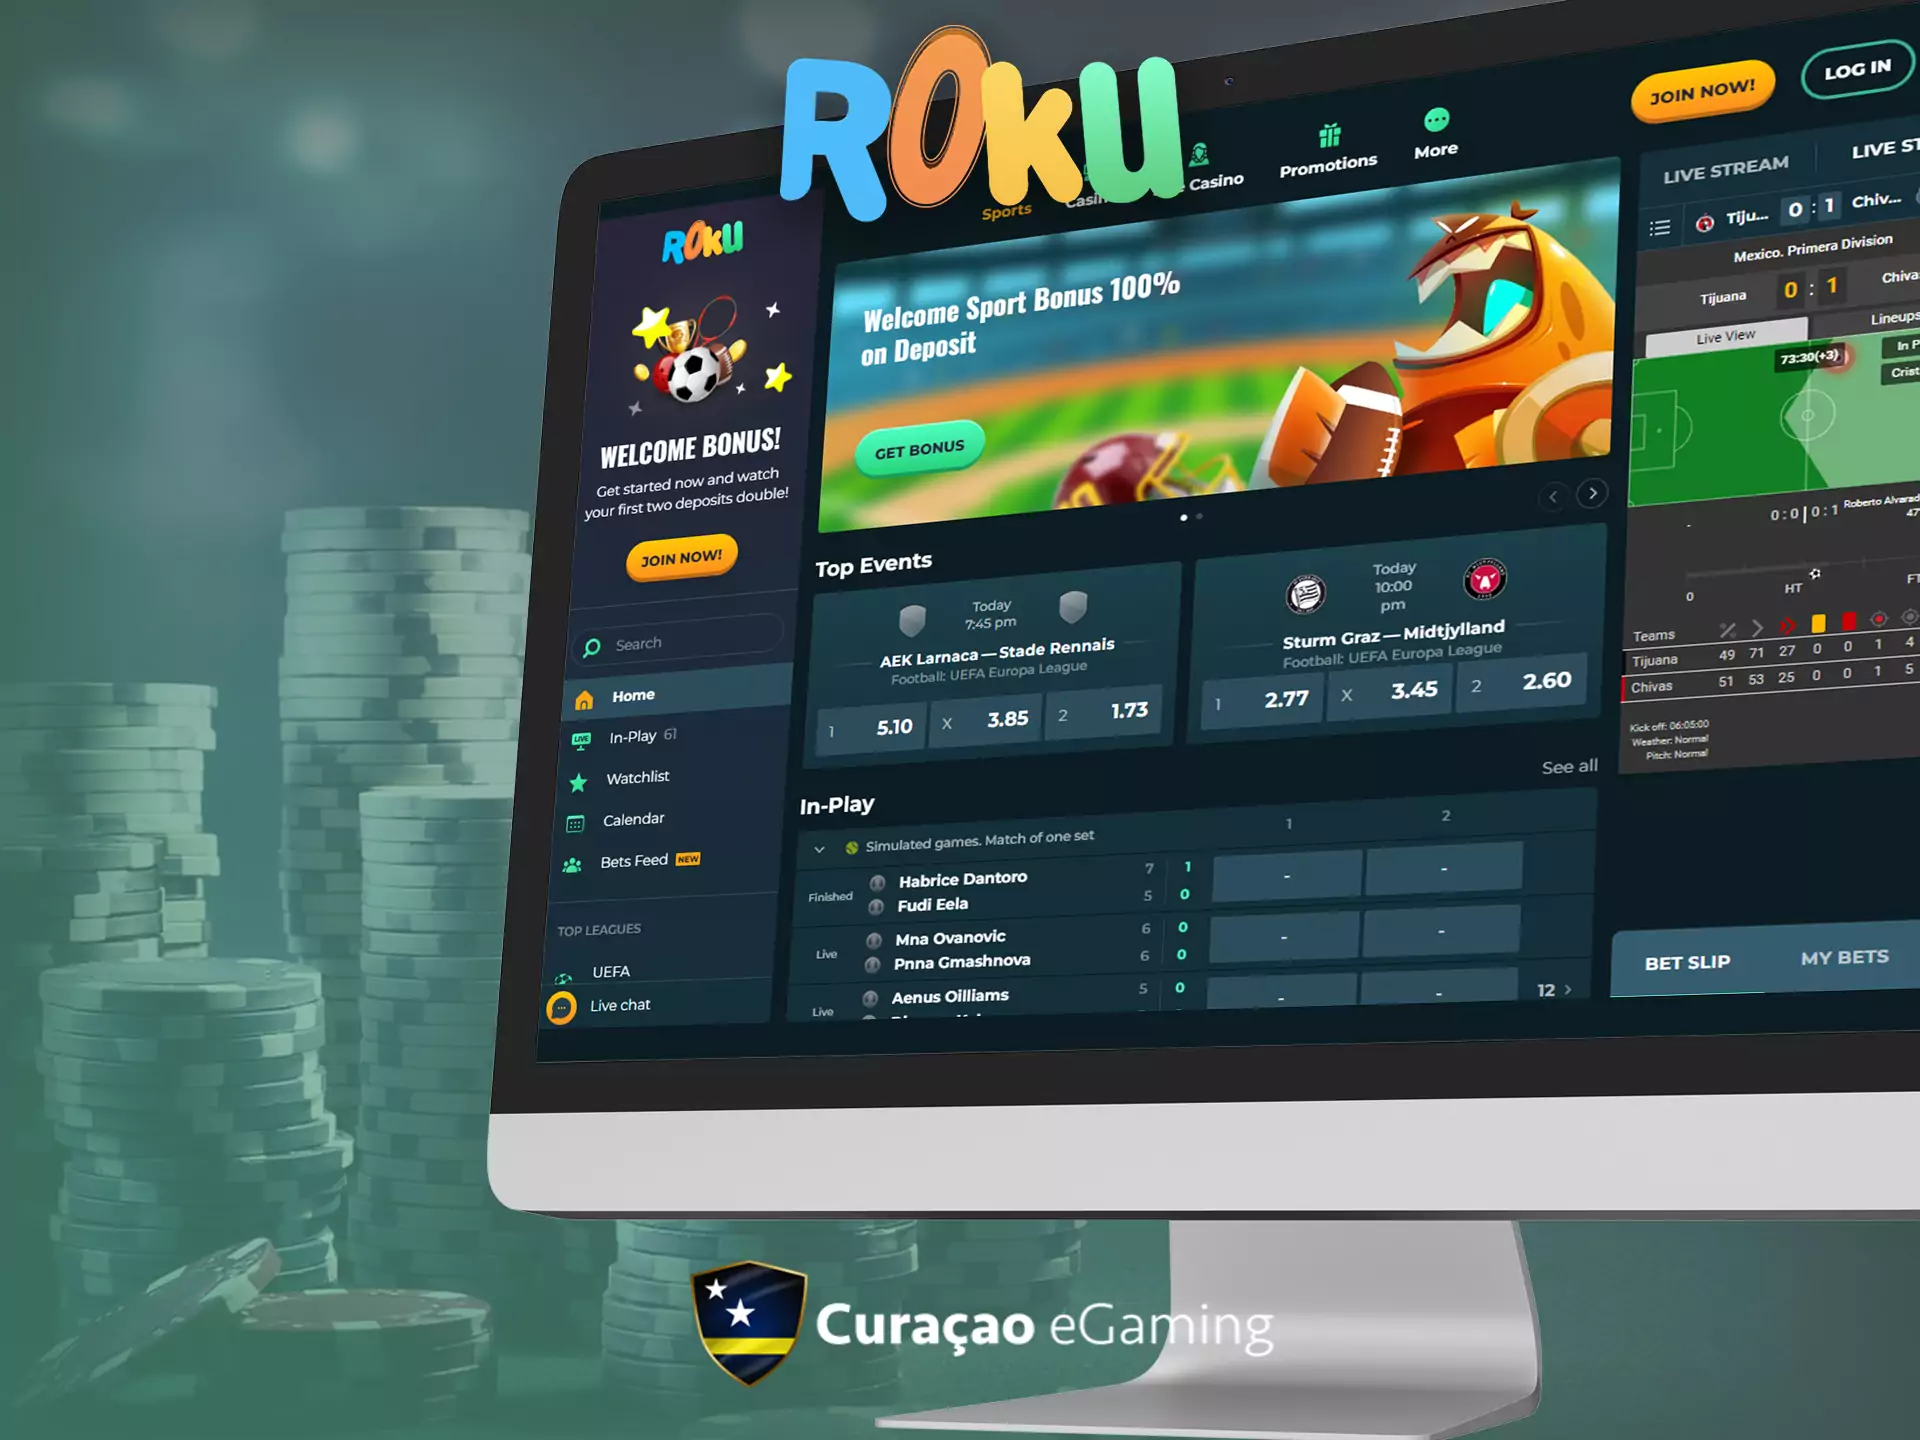 Rokubet works legally and online under the Curacao license.